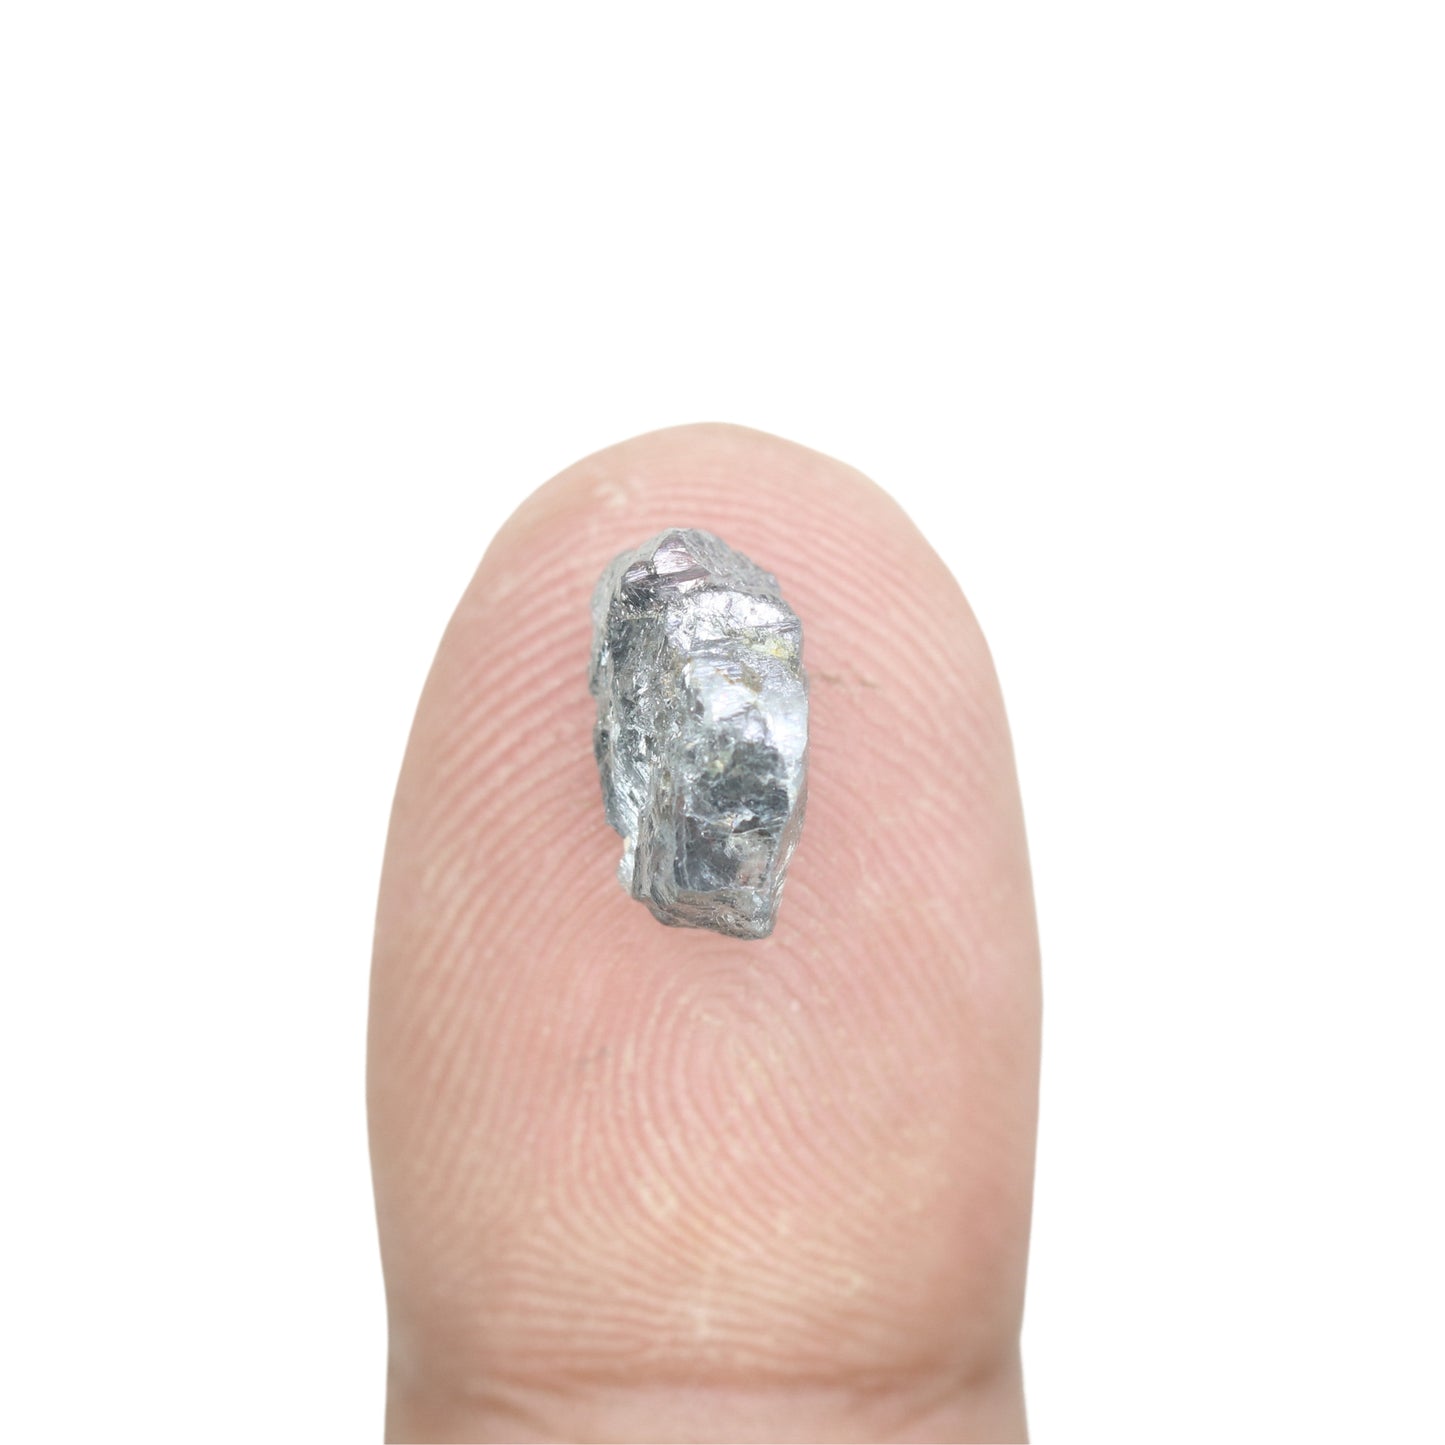 2.83 CT Fancy Salt And Pepper Grey Rough Uncut Diamond For Engagement Ring